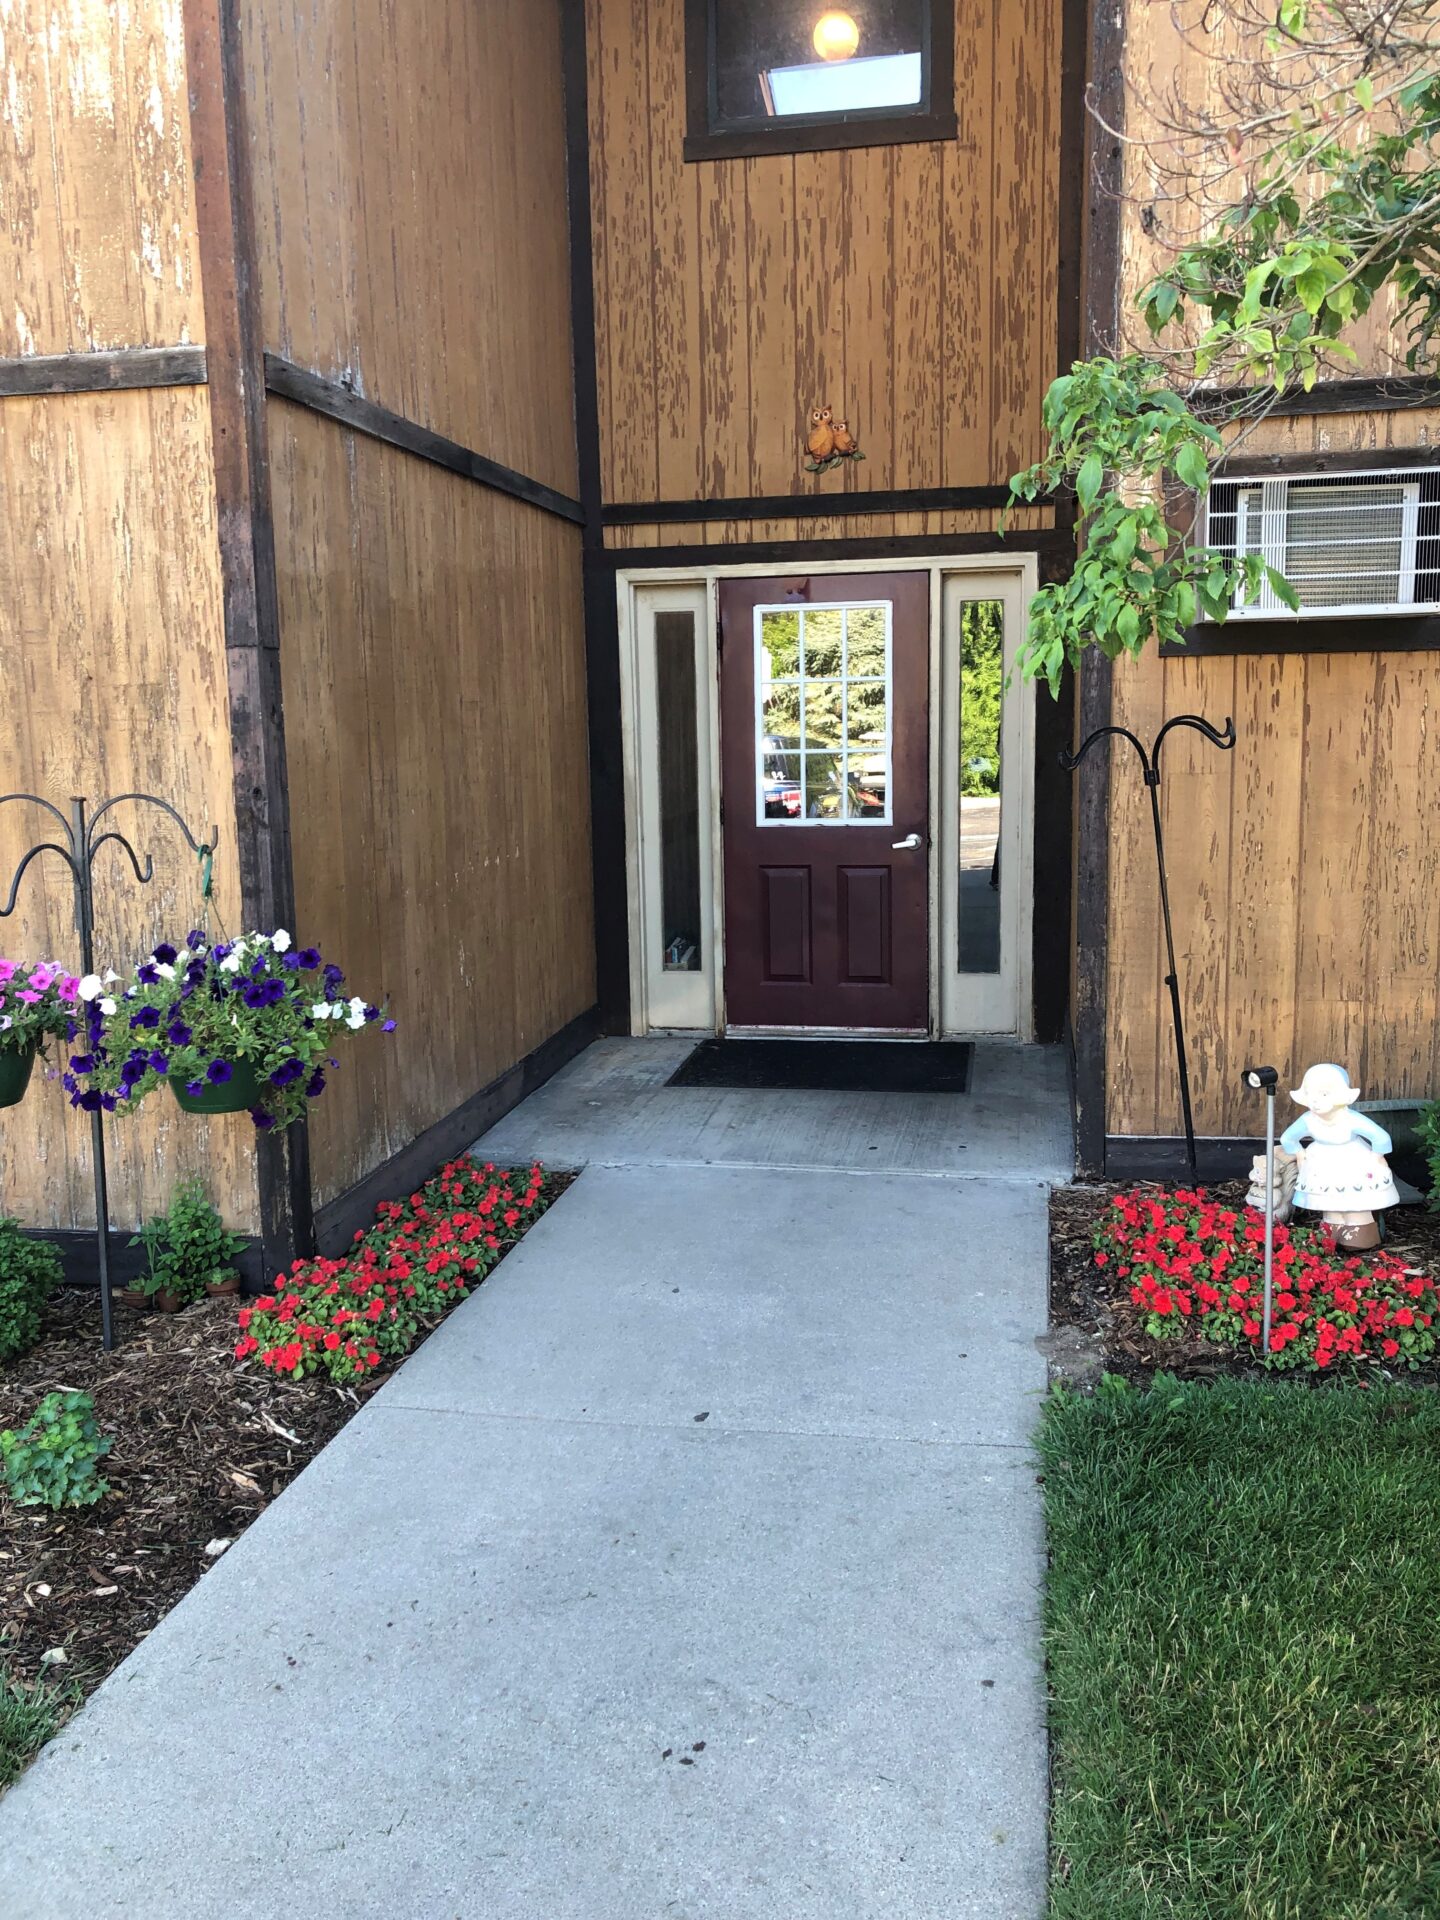 Ridgeview apartment entry way and flowers decoration